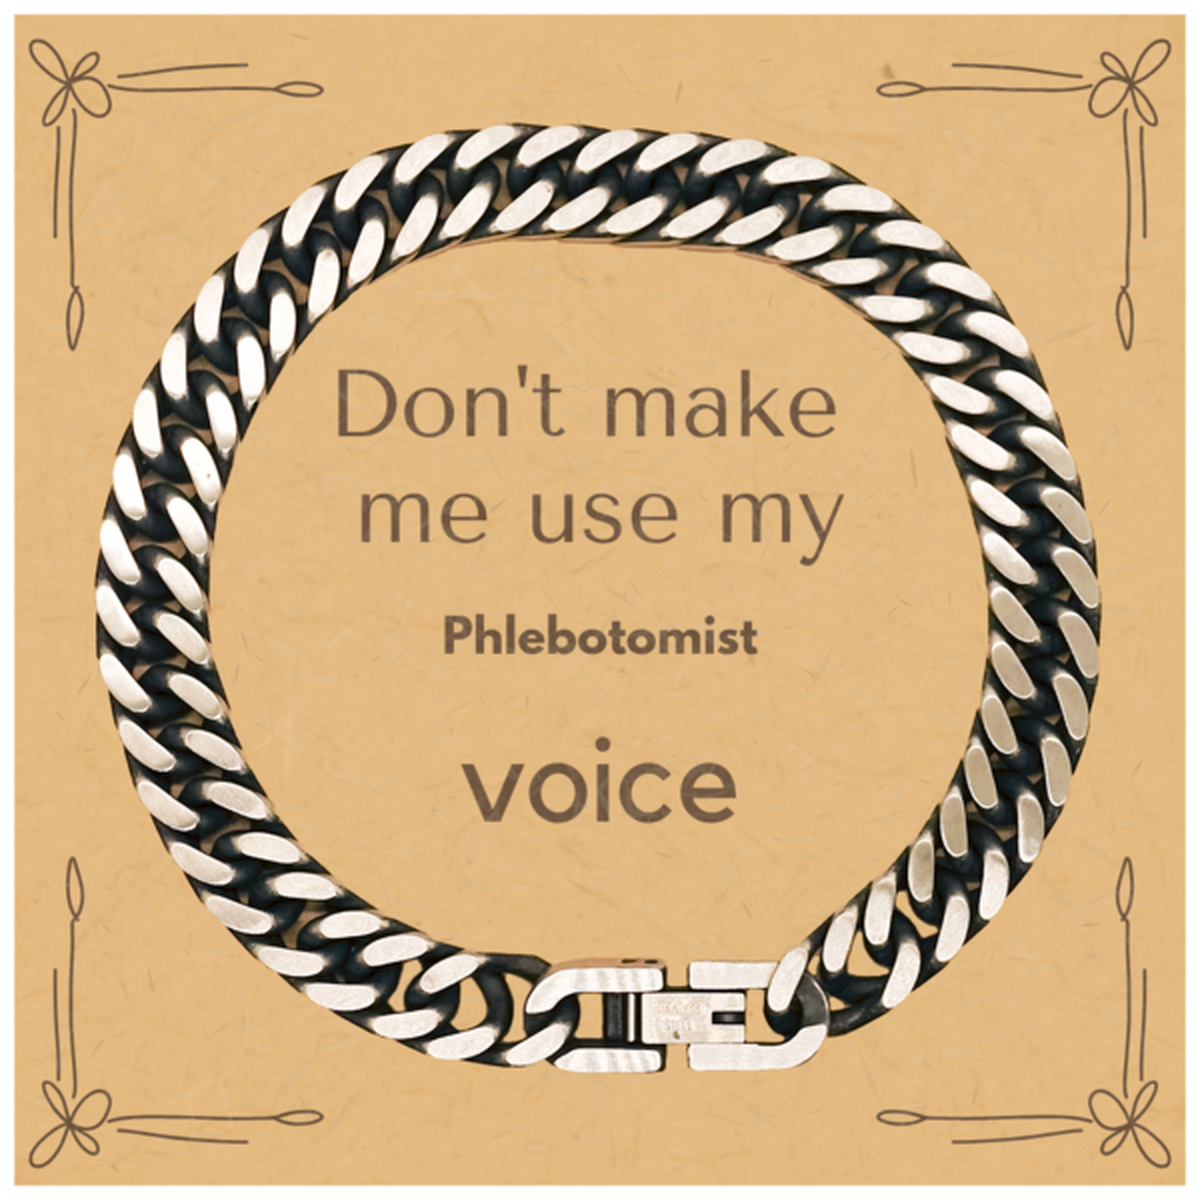 Don't make me use my Phlebotomist voice, Sarcasm Phlebotomist Card Gifts, Christmas Phlebotomist Cuban Link Chain Bracelet Birthday Unique Gifts For Phlebotomist Coworkers, Men, Women, Colleague, Friends